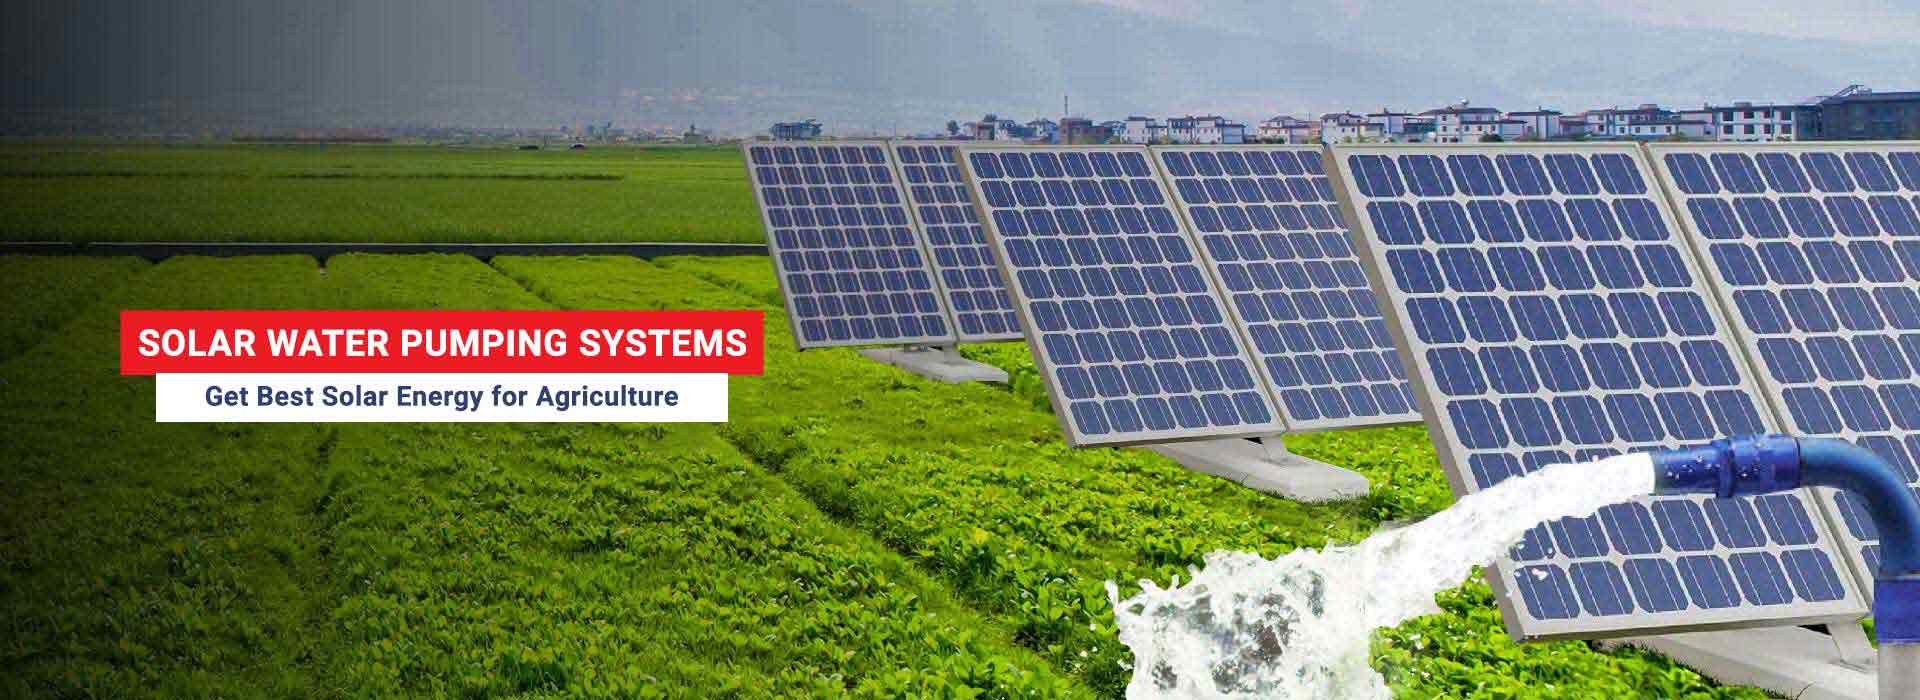 Solar Water Pumping Systems in Netherlands